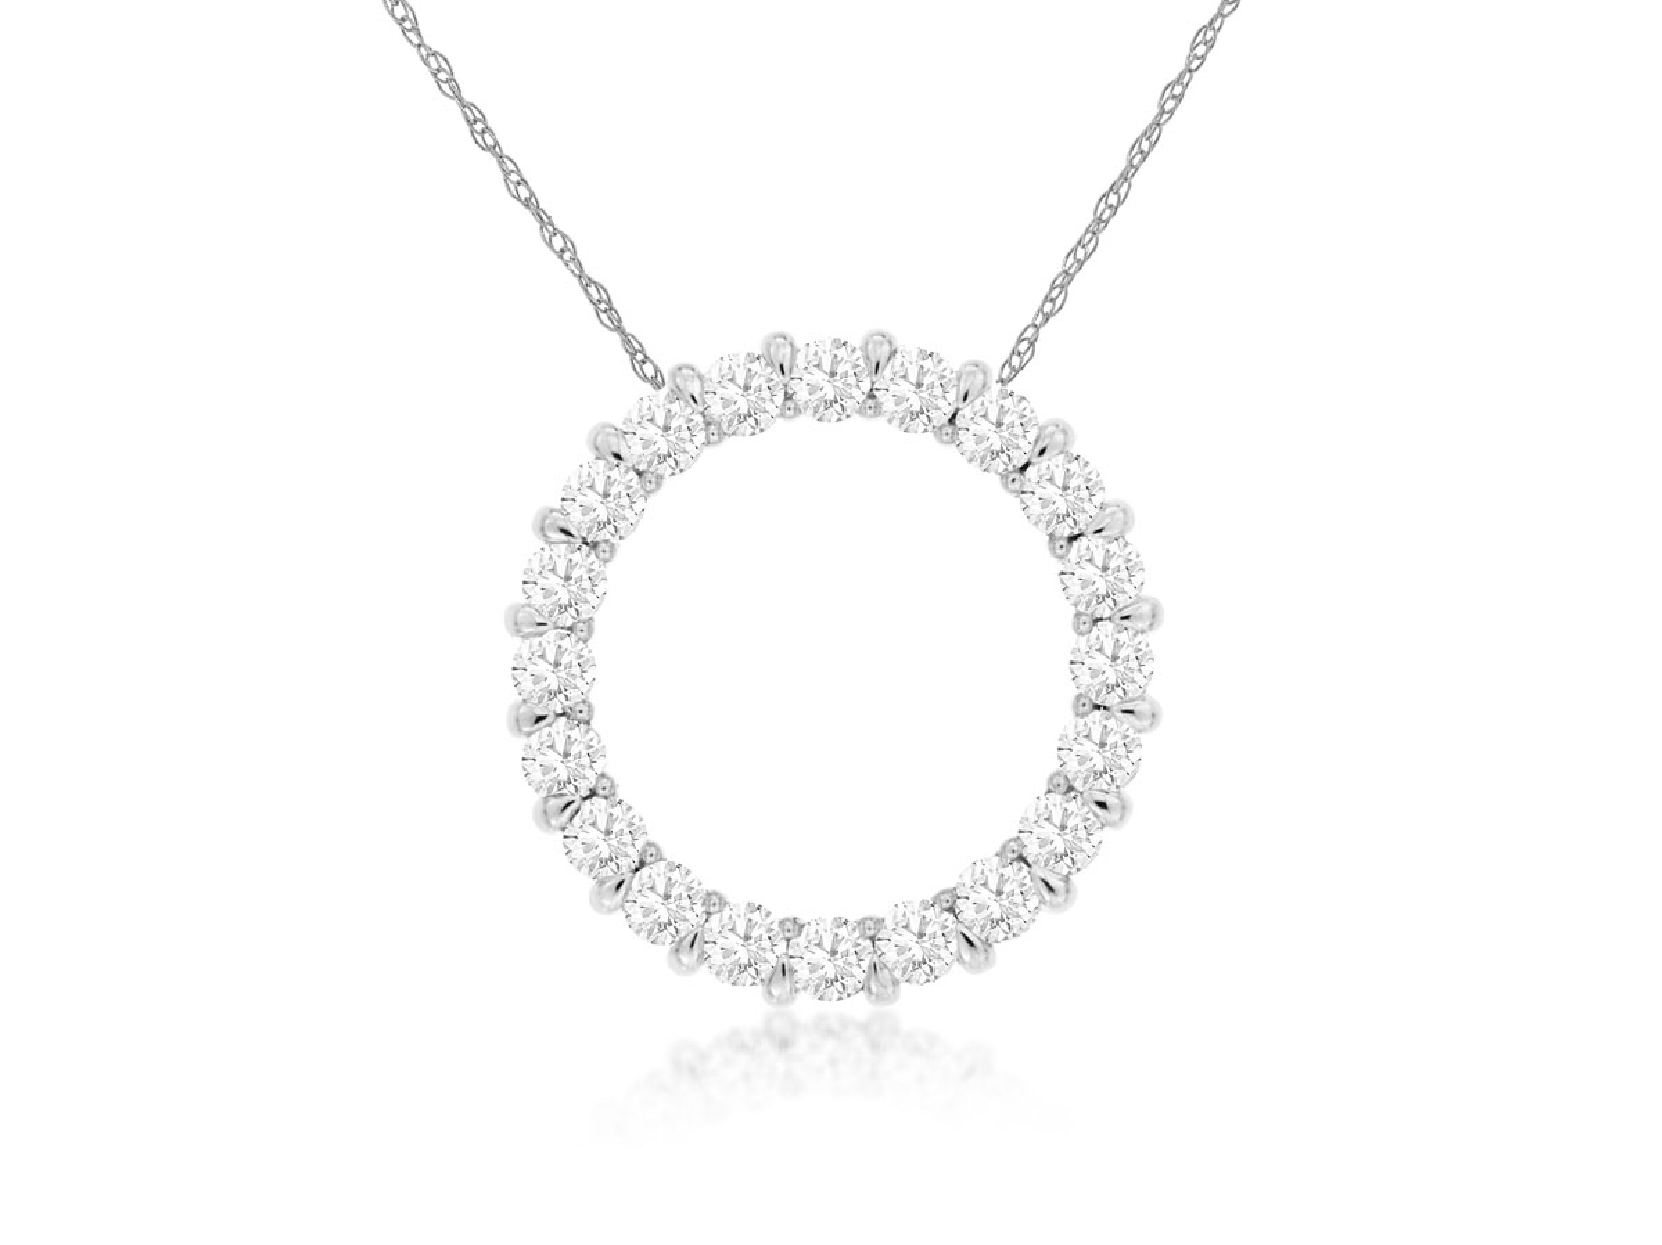 14K White Gold Circle Diamond Necklace

.50ct
16 Inches